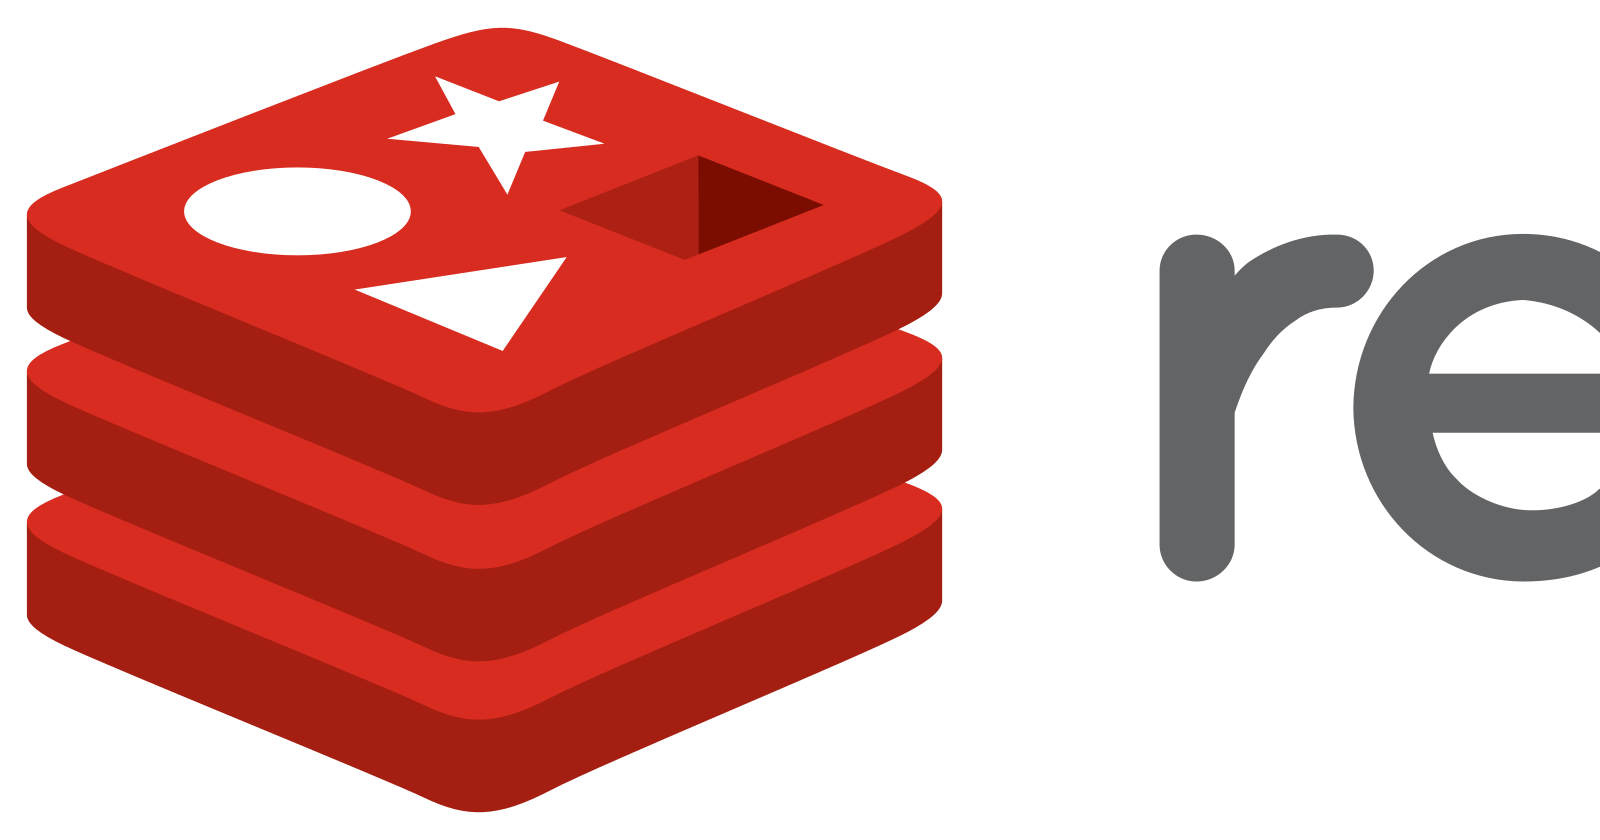 REDIS, A cache database